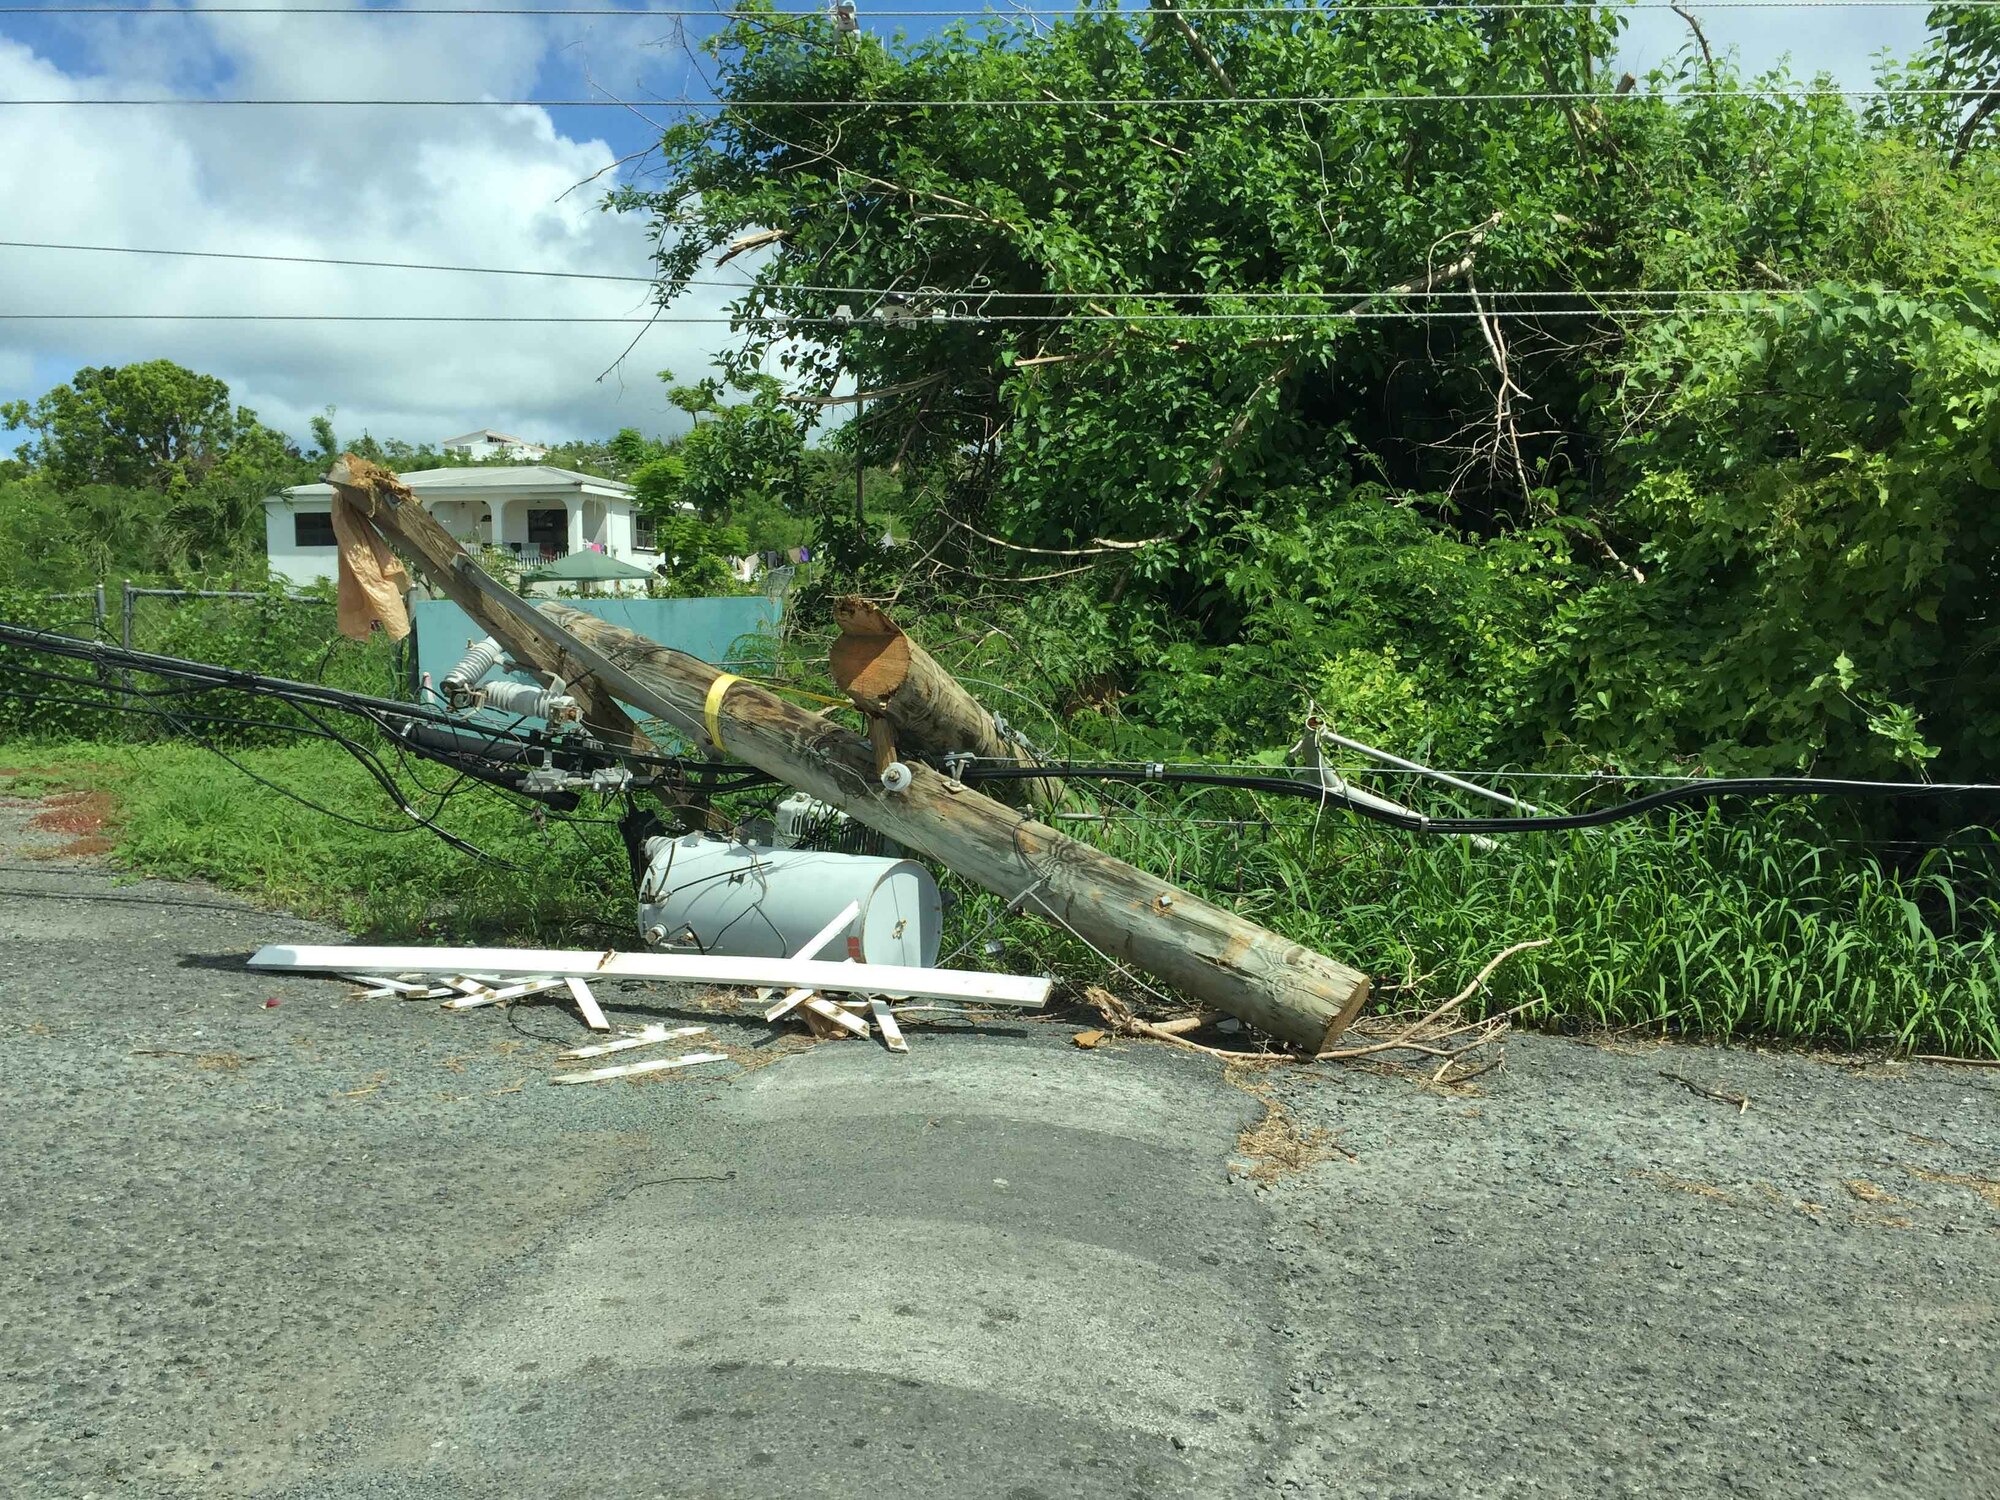 Fallen power lines and uprooted trees litter the streets of St. Croix where Claudette Wells, an acquisition program manager for the Air Force Technical Applications Center, Patrick AFB, Fla., volunteered to serve as a disaster relief worker for the Federal Emergency Management Agency after Hurricane Maria impacted the island.  "The damage was unimaginable," said Wells.  (U.S. Air Force photo by M. Claudette Wells)